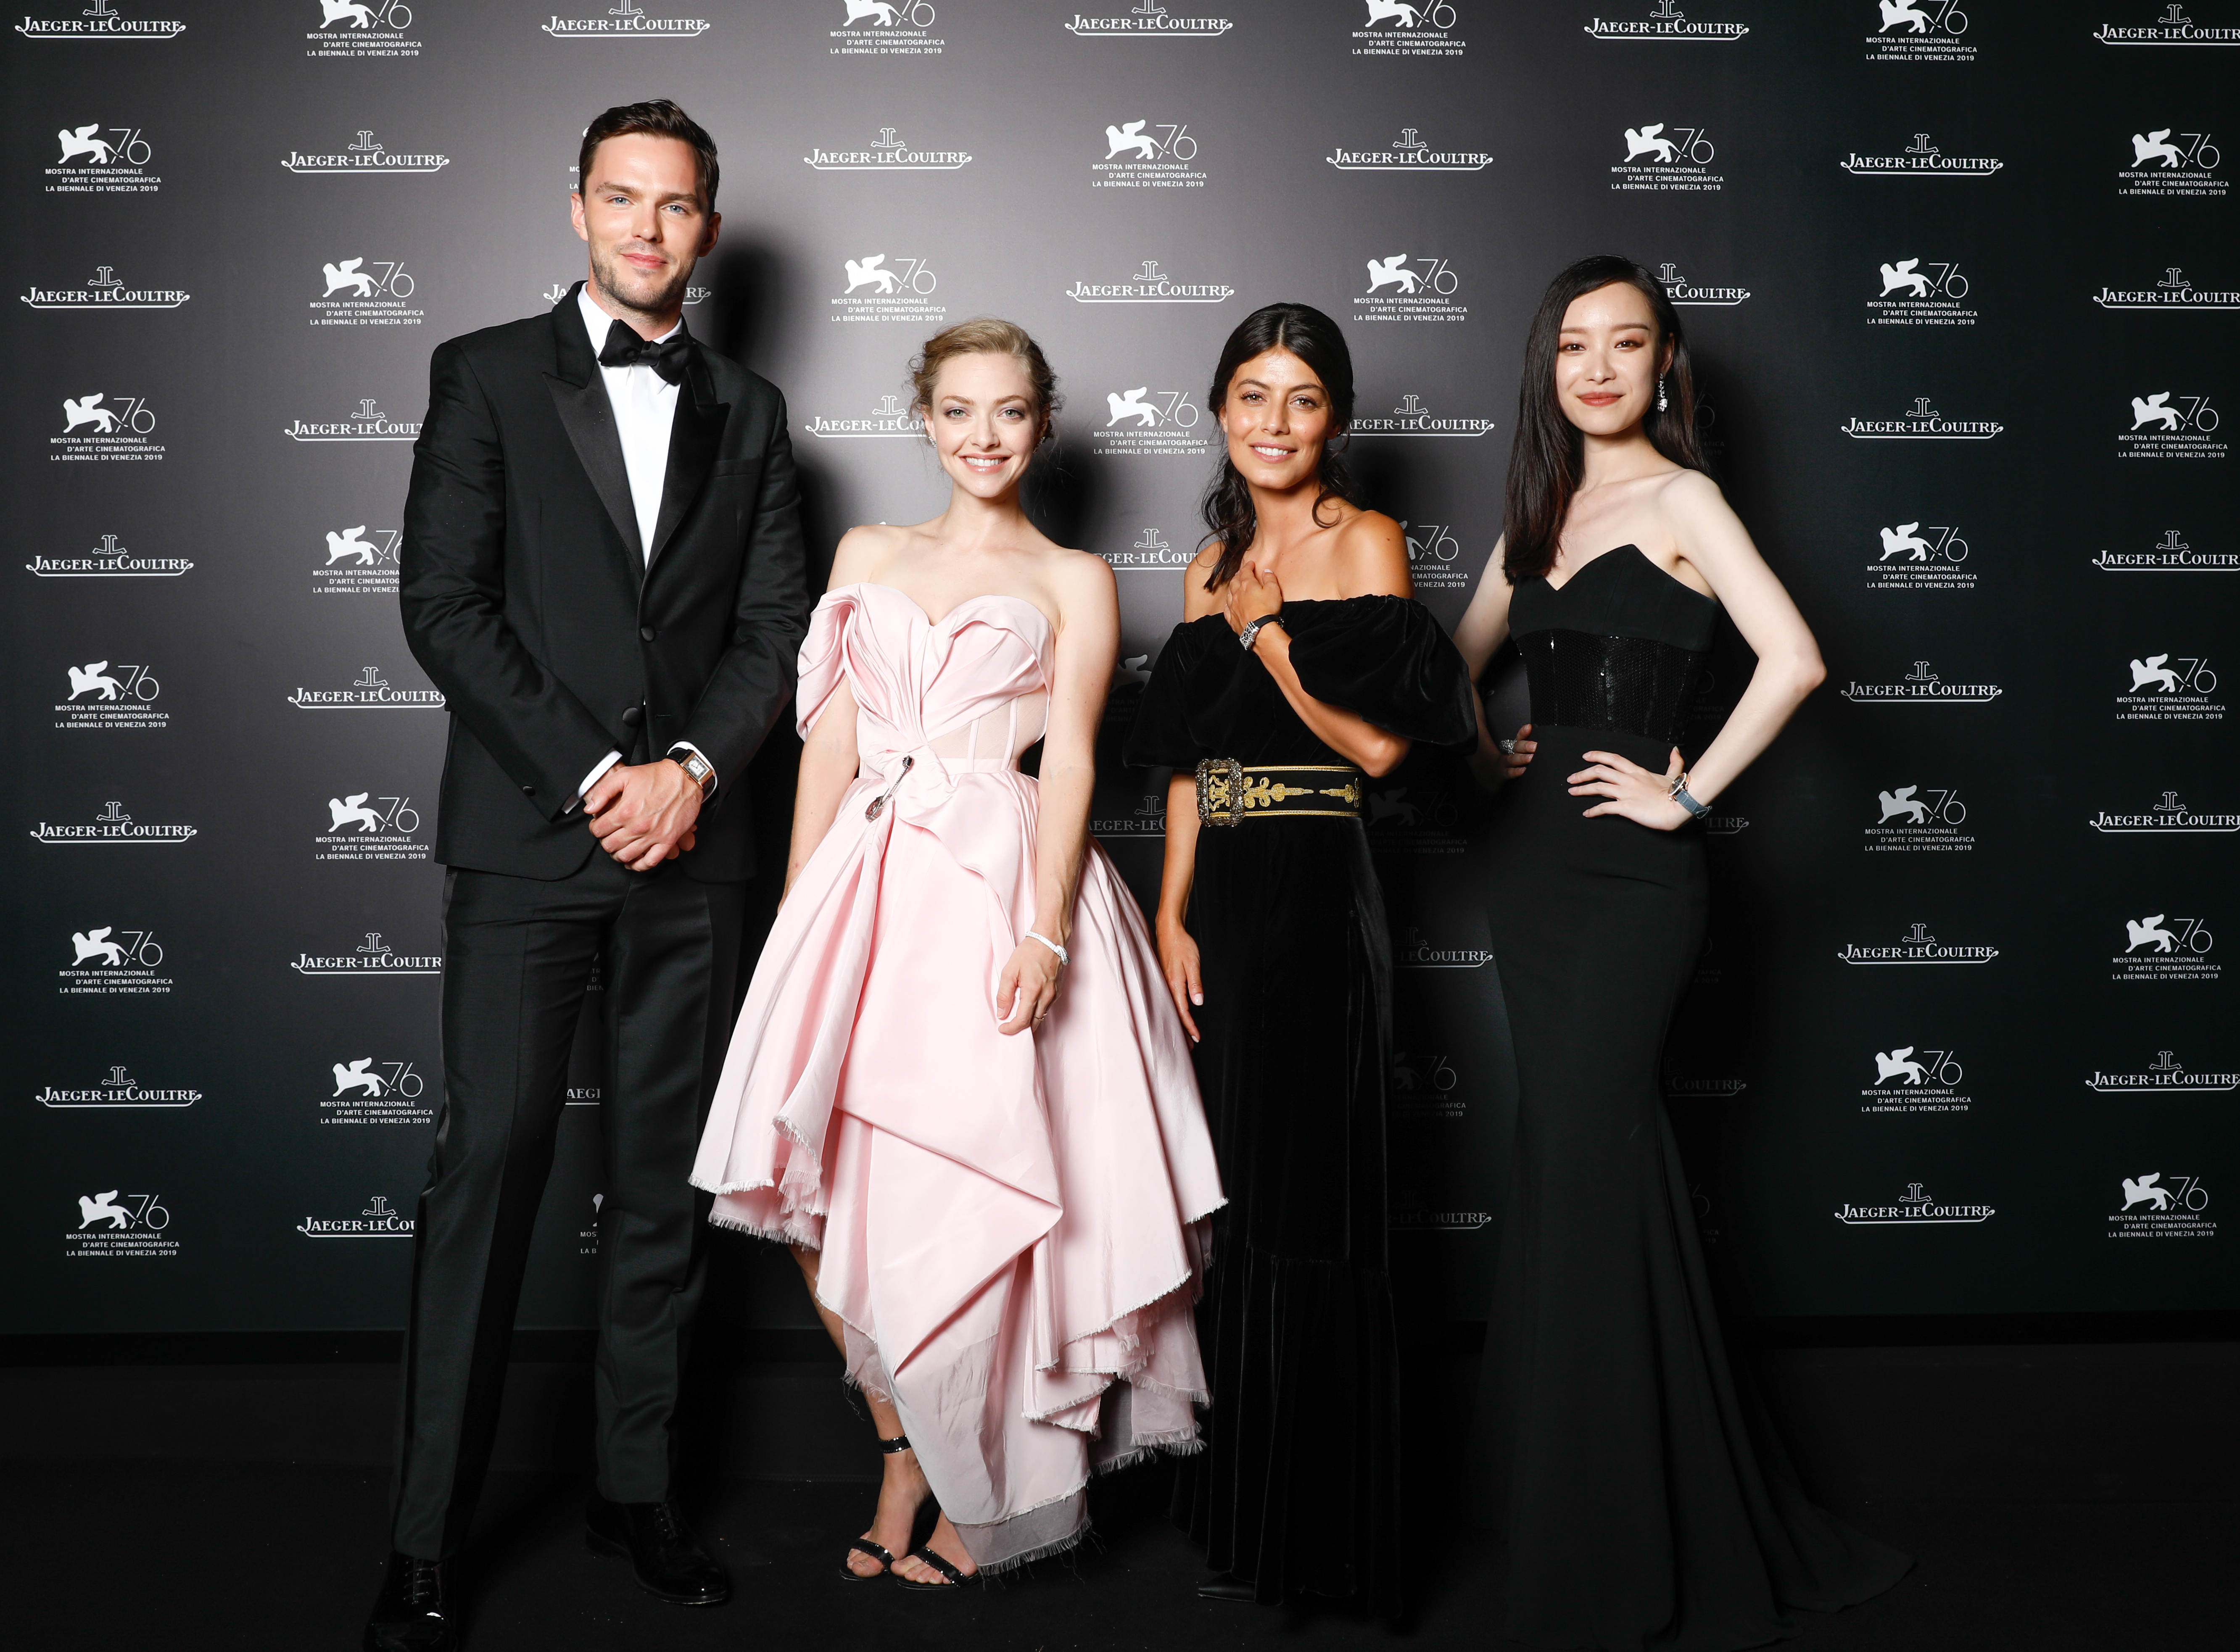 Nicholas Hoult (left), was one of the male celebrities who rocked a double-dial wristwatch at the Venice Film Festival, pictured here with Amanda Seyfried, Alessandra Mastronardi and Ni Ni. Photo: Sebastiano Pessina